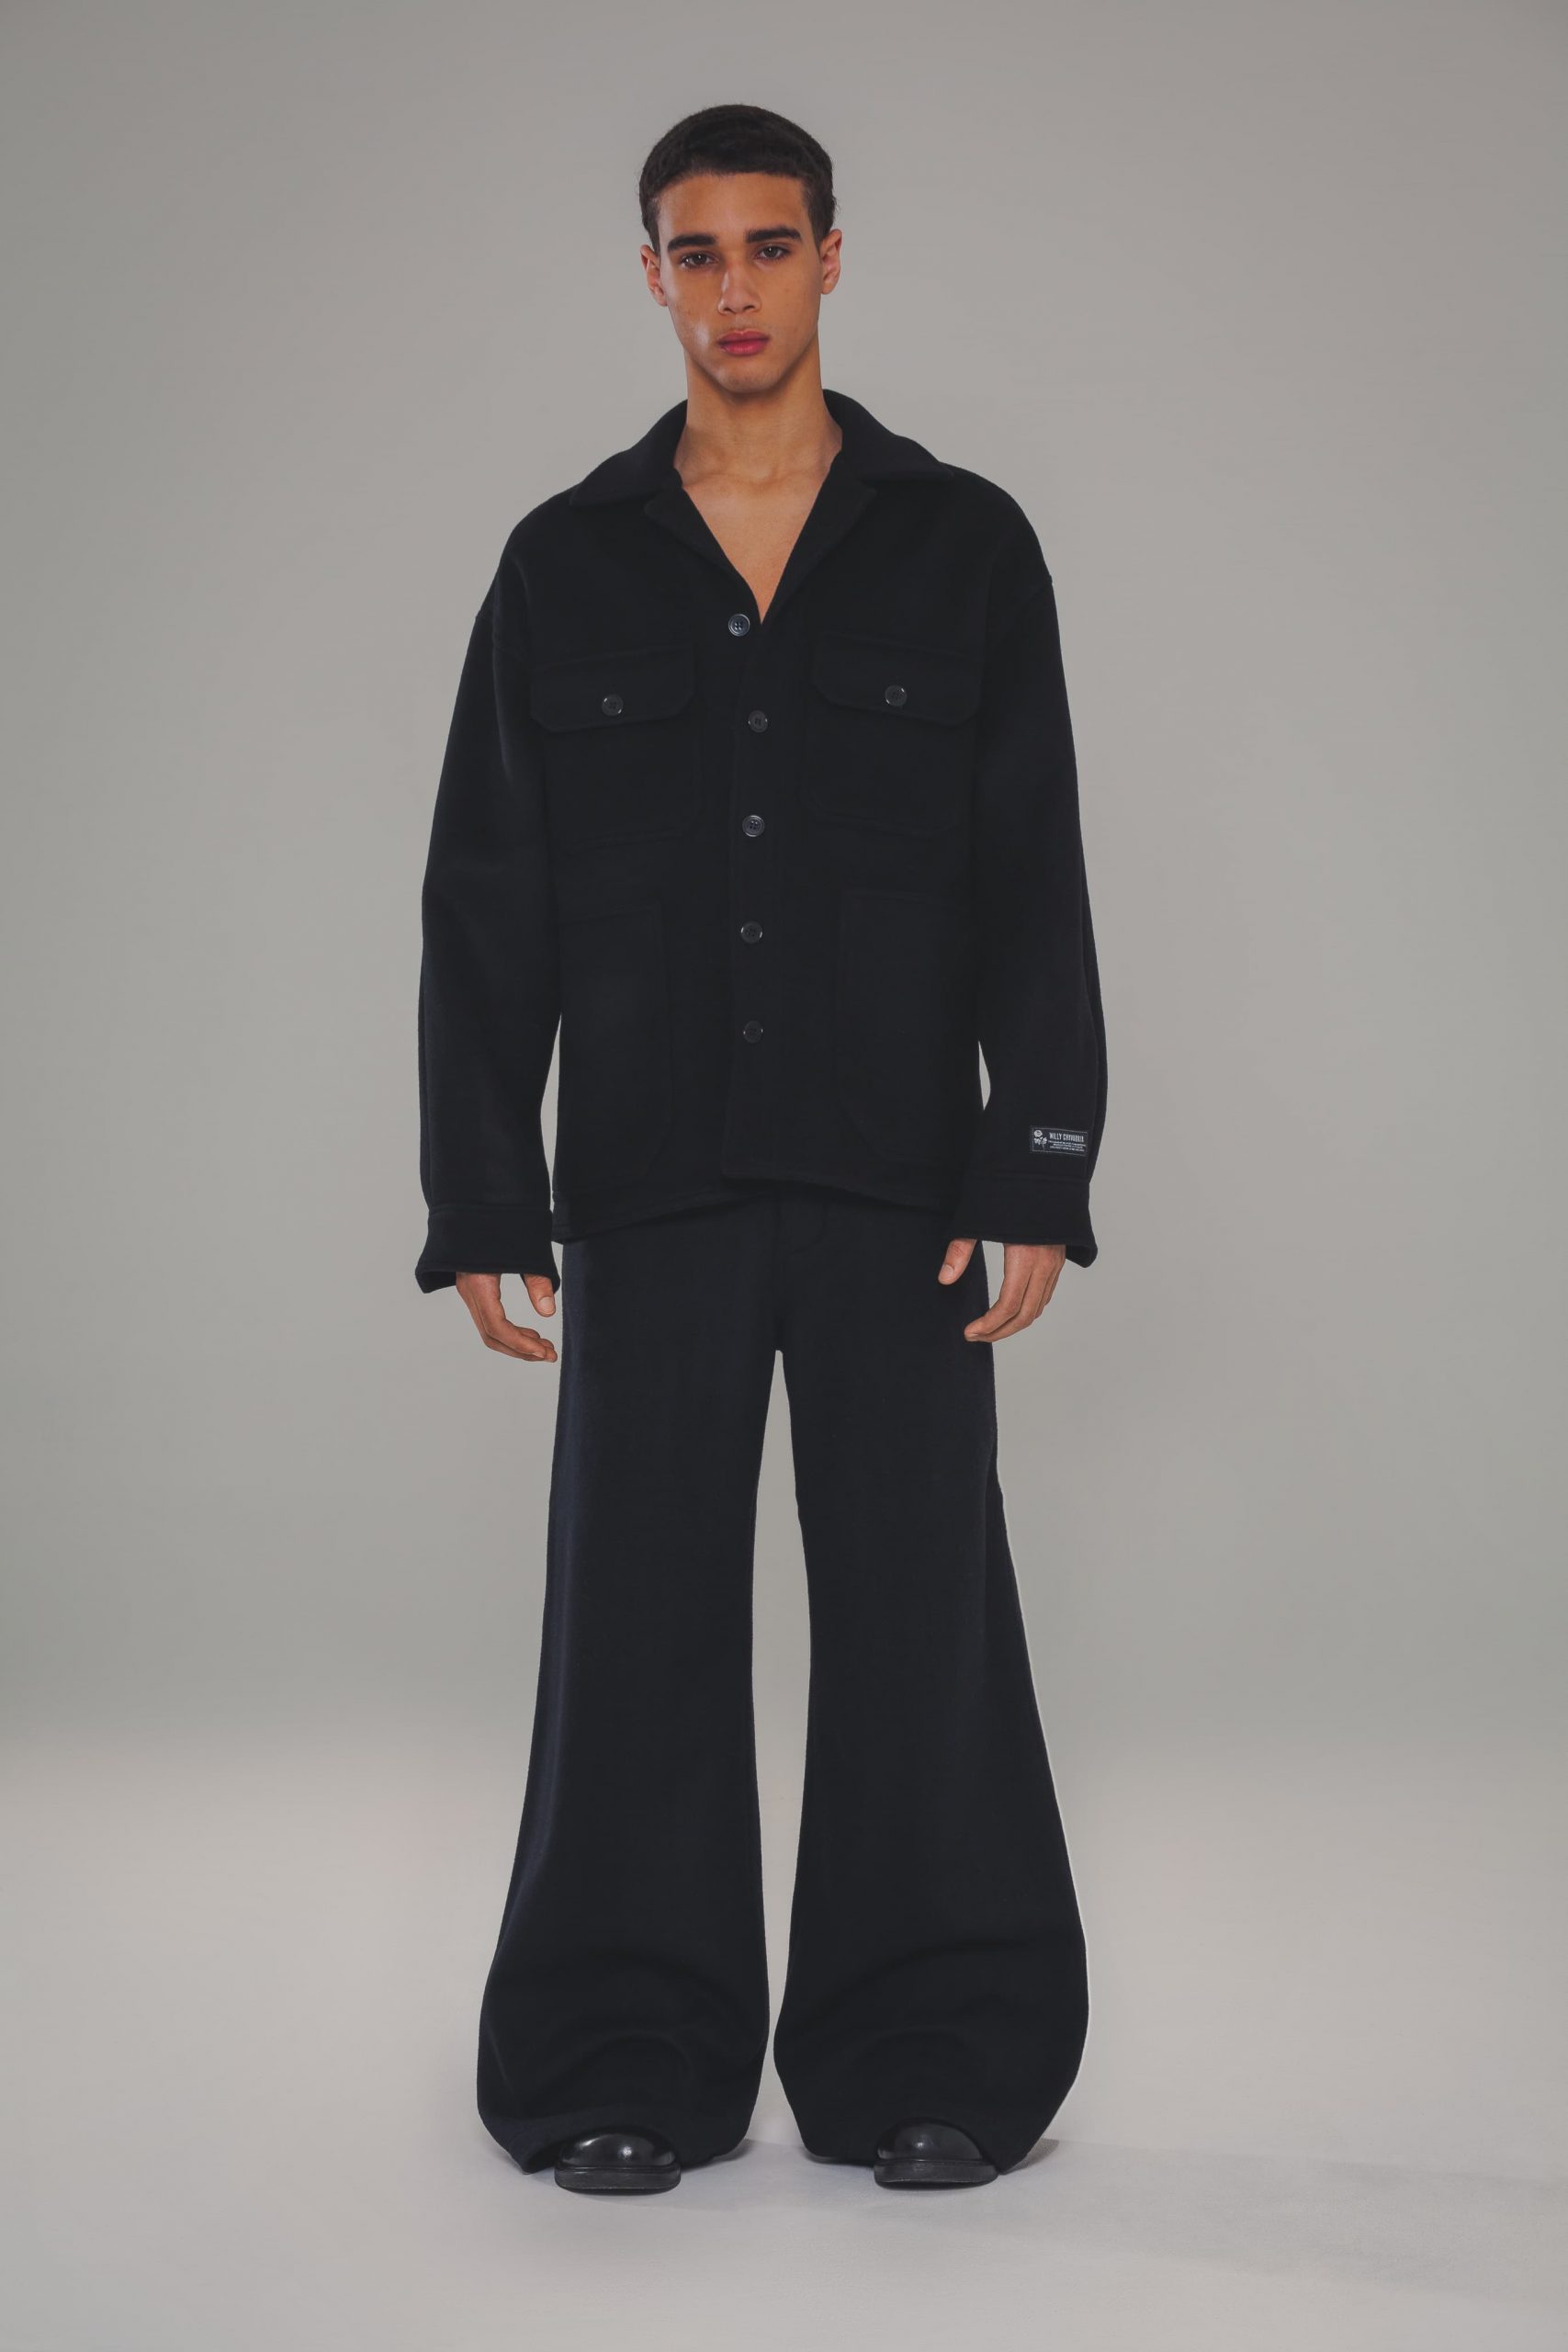 Willy Chavarria Fall 2021 Men's | The Impression